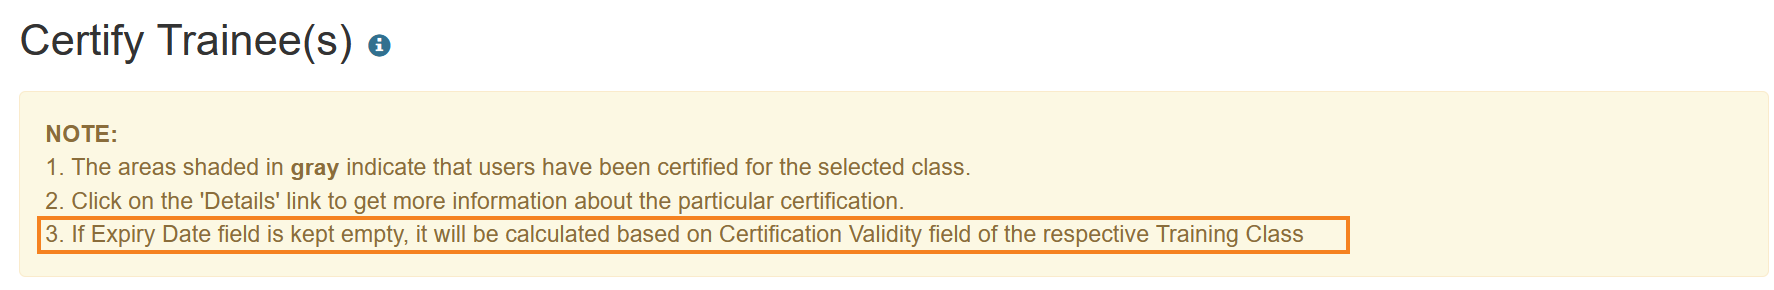 Screenshot of the Note section at the top of Certify Trainee(s) page.